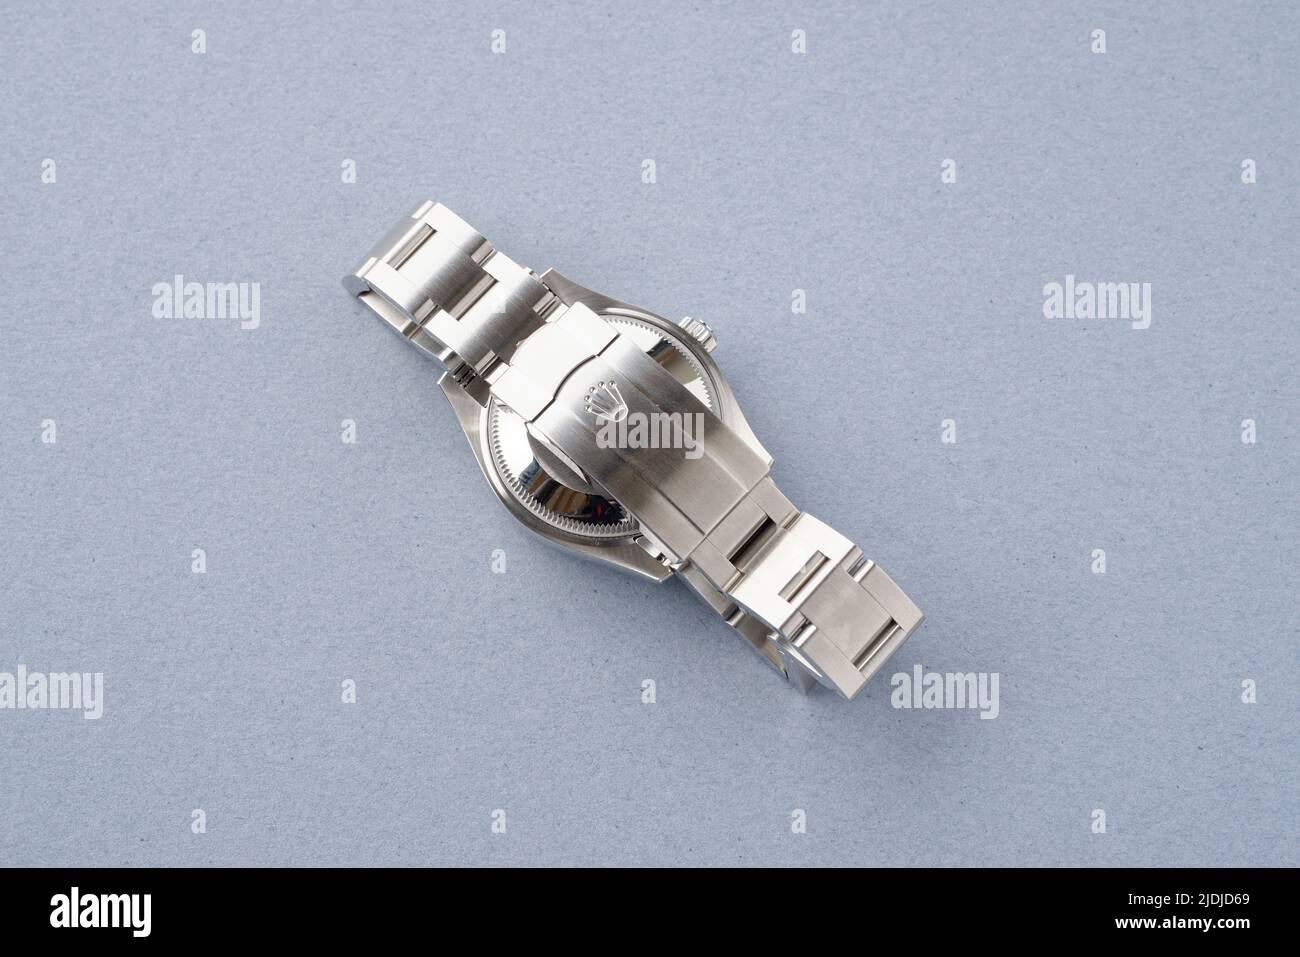 The back of a Rolex wristwatch showing the metal bracelet strap. Stock Photo